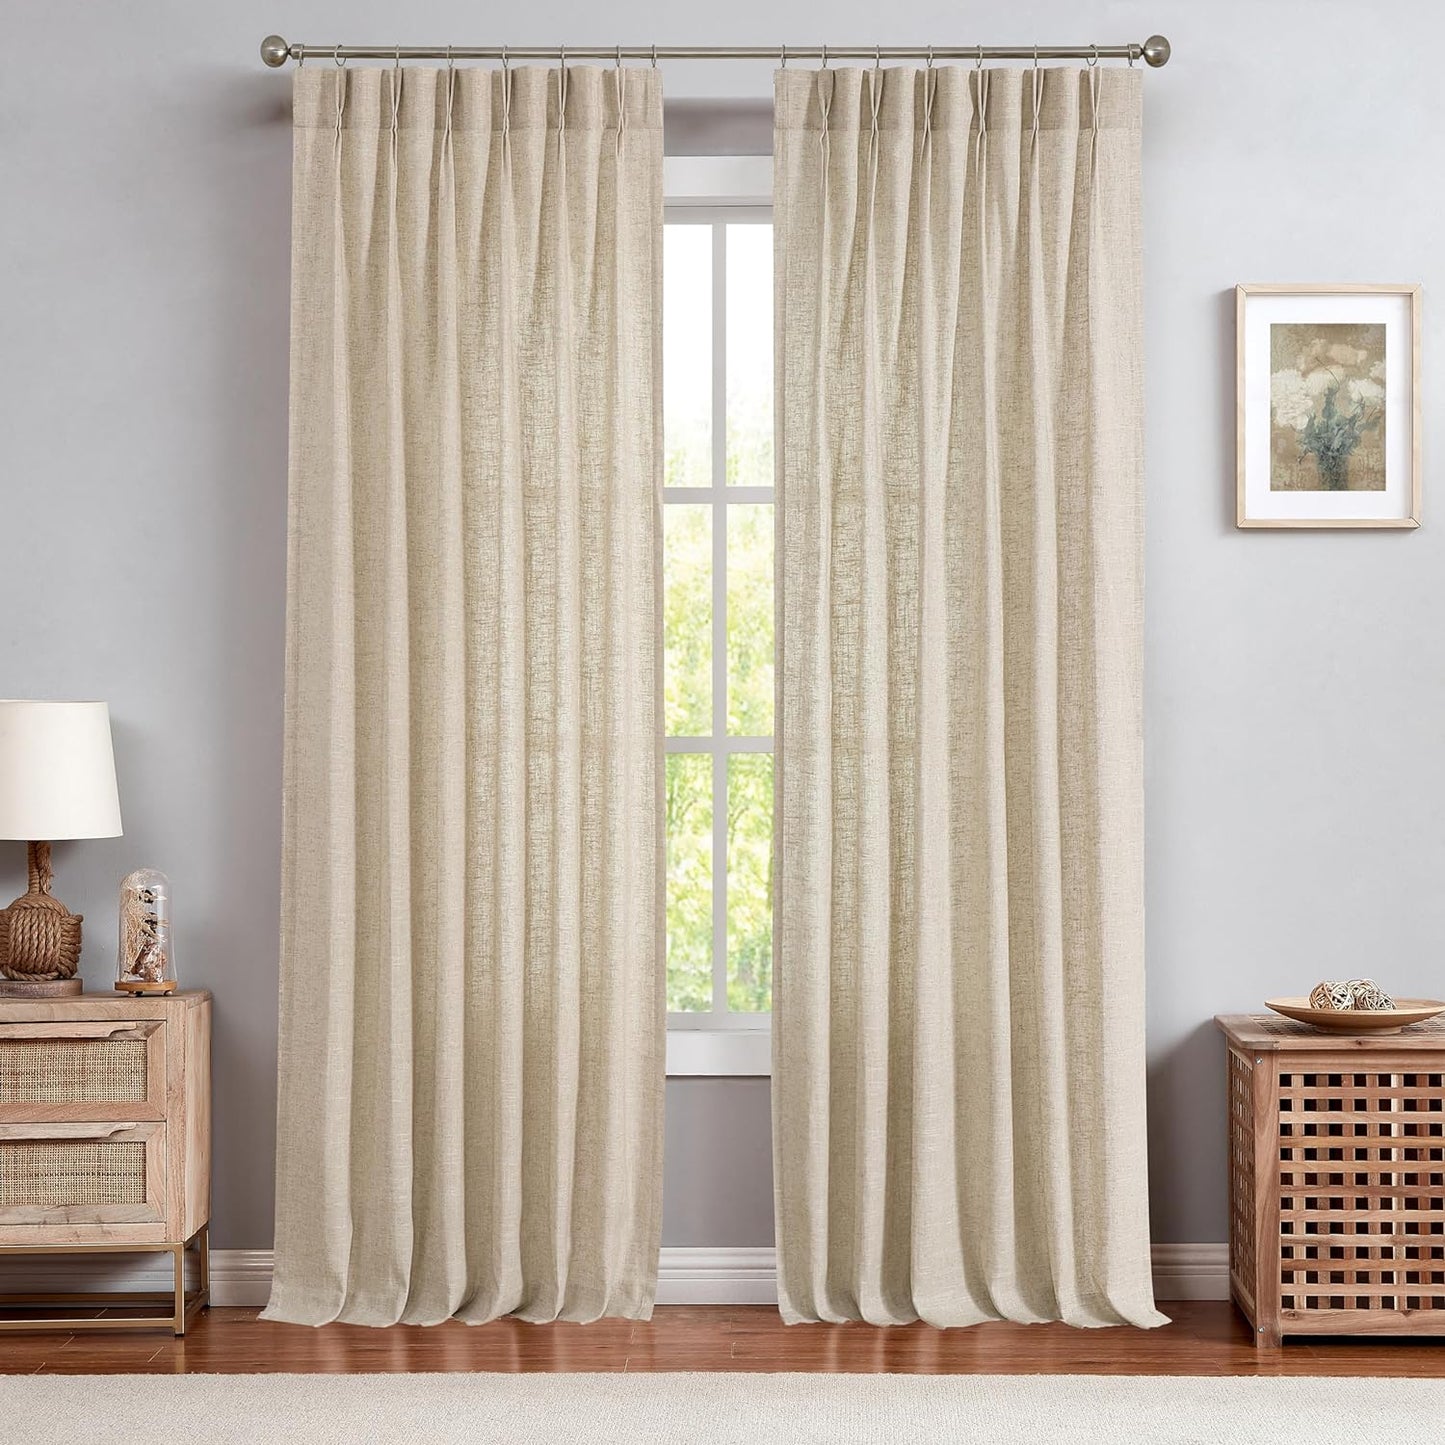 White Pinch Pleated Curtain Semi Sheer Curtain Panel Linen Cotton Blend Decorative Drape 84 Inches Long for Living Room Bedroom Farmhouse Rustic Window Treatment, White, 34"X84"X2  Central Park Linen 34"X95"X2 